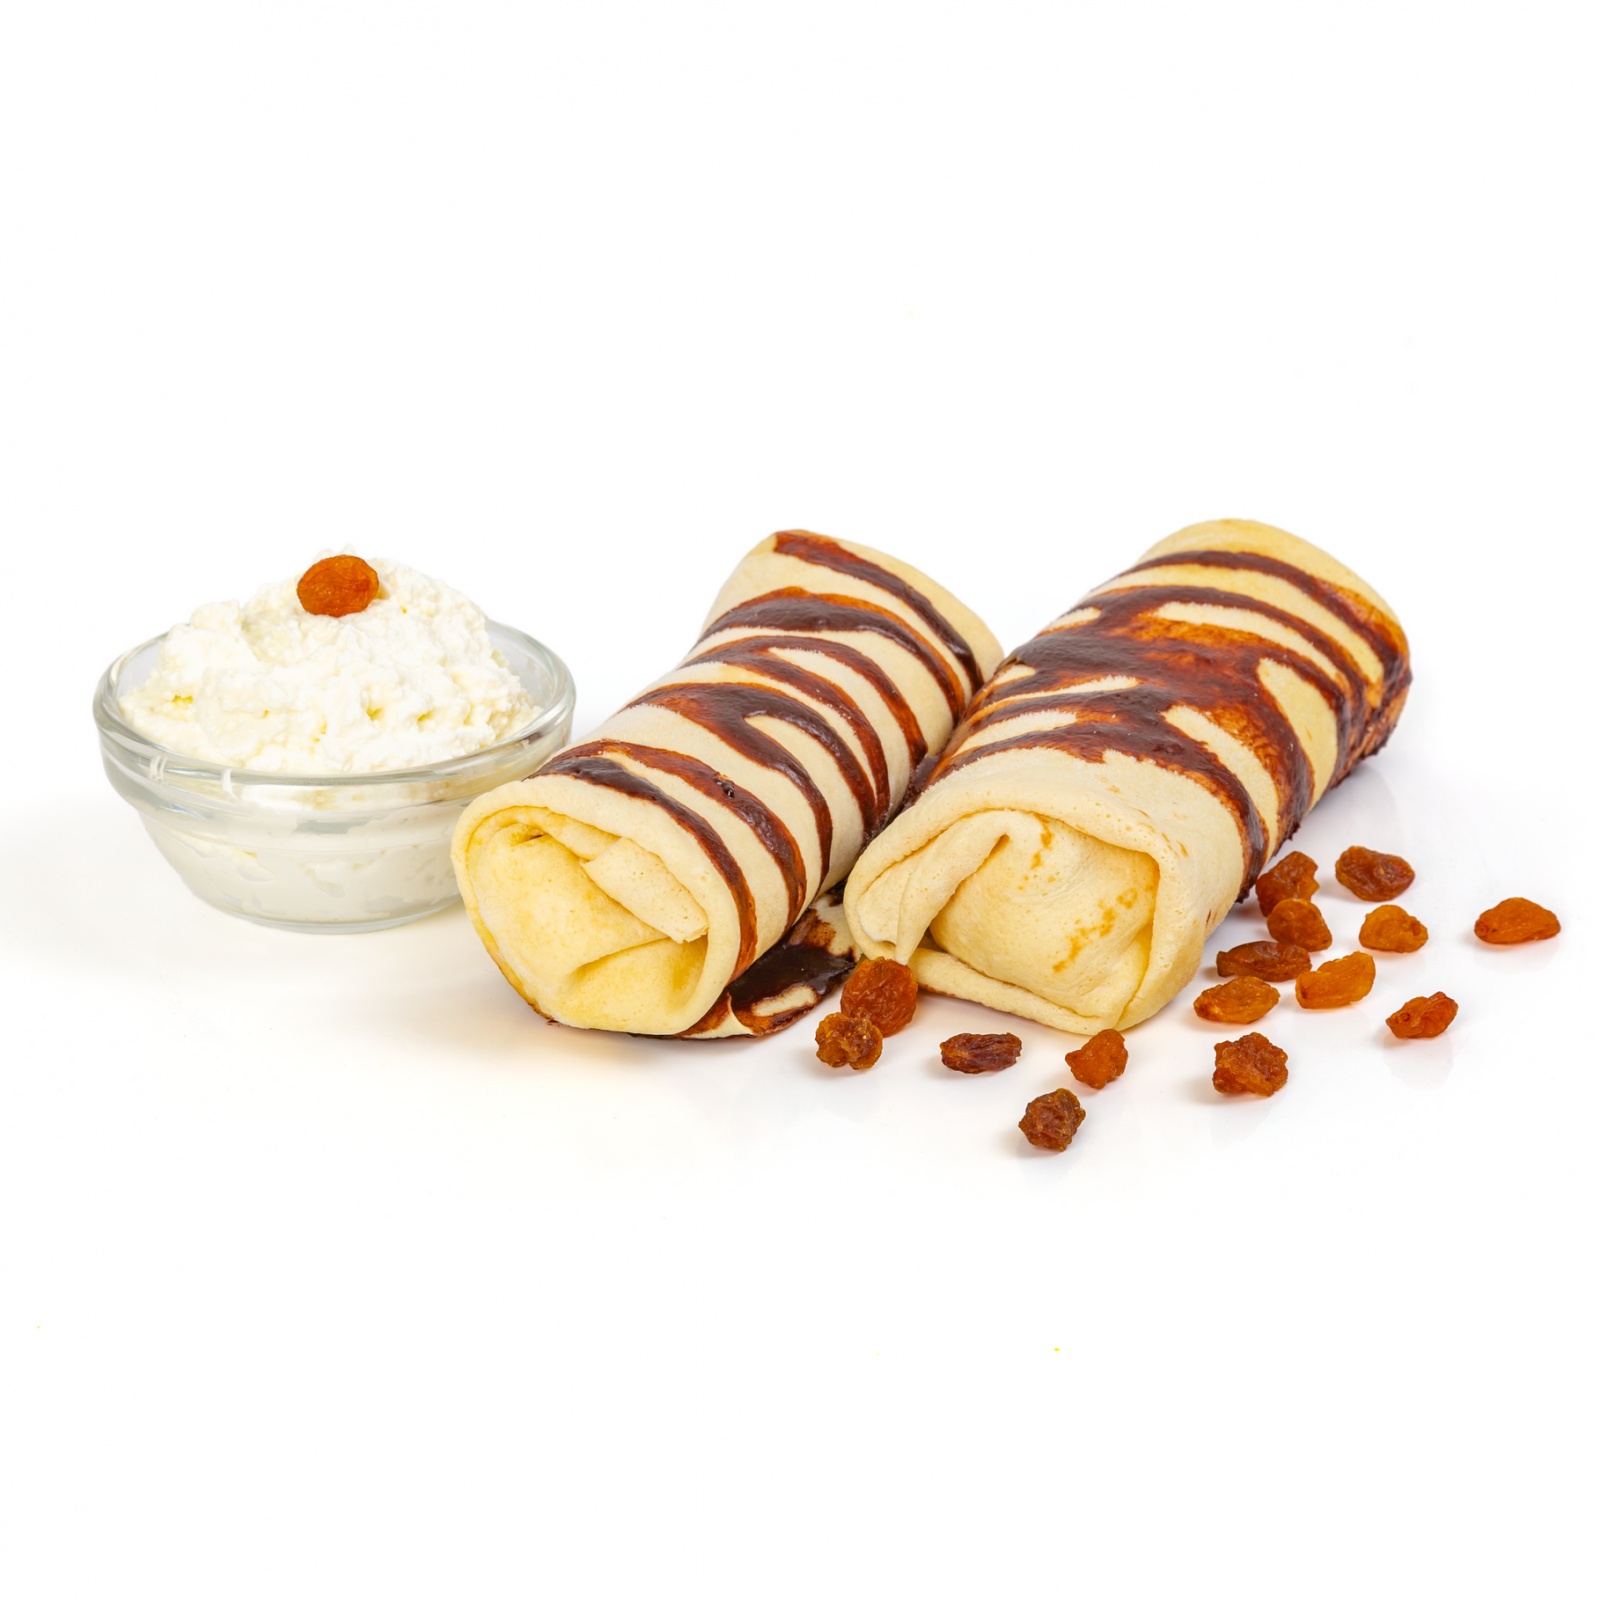 Cottage chees crepes with raisins